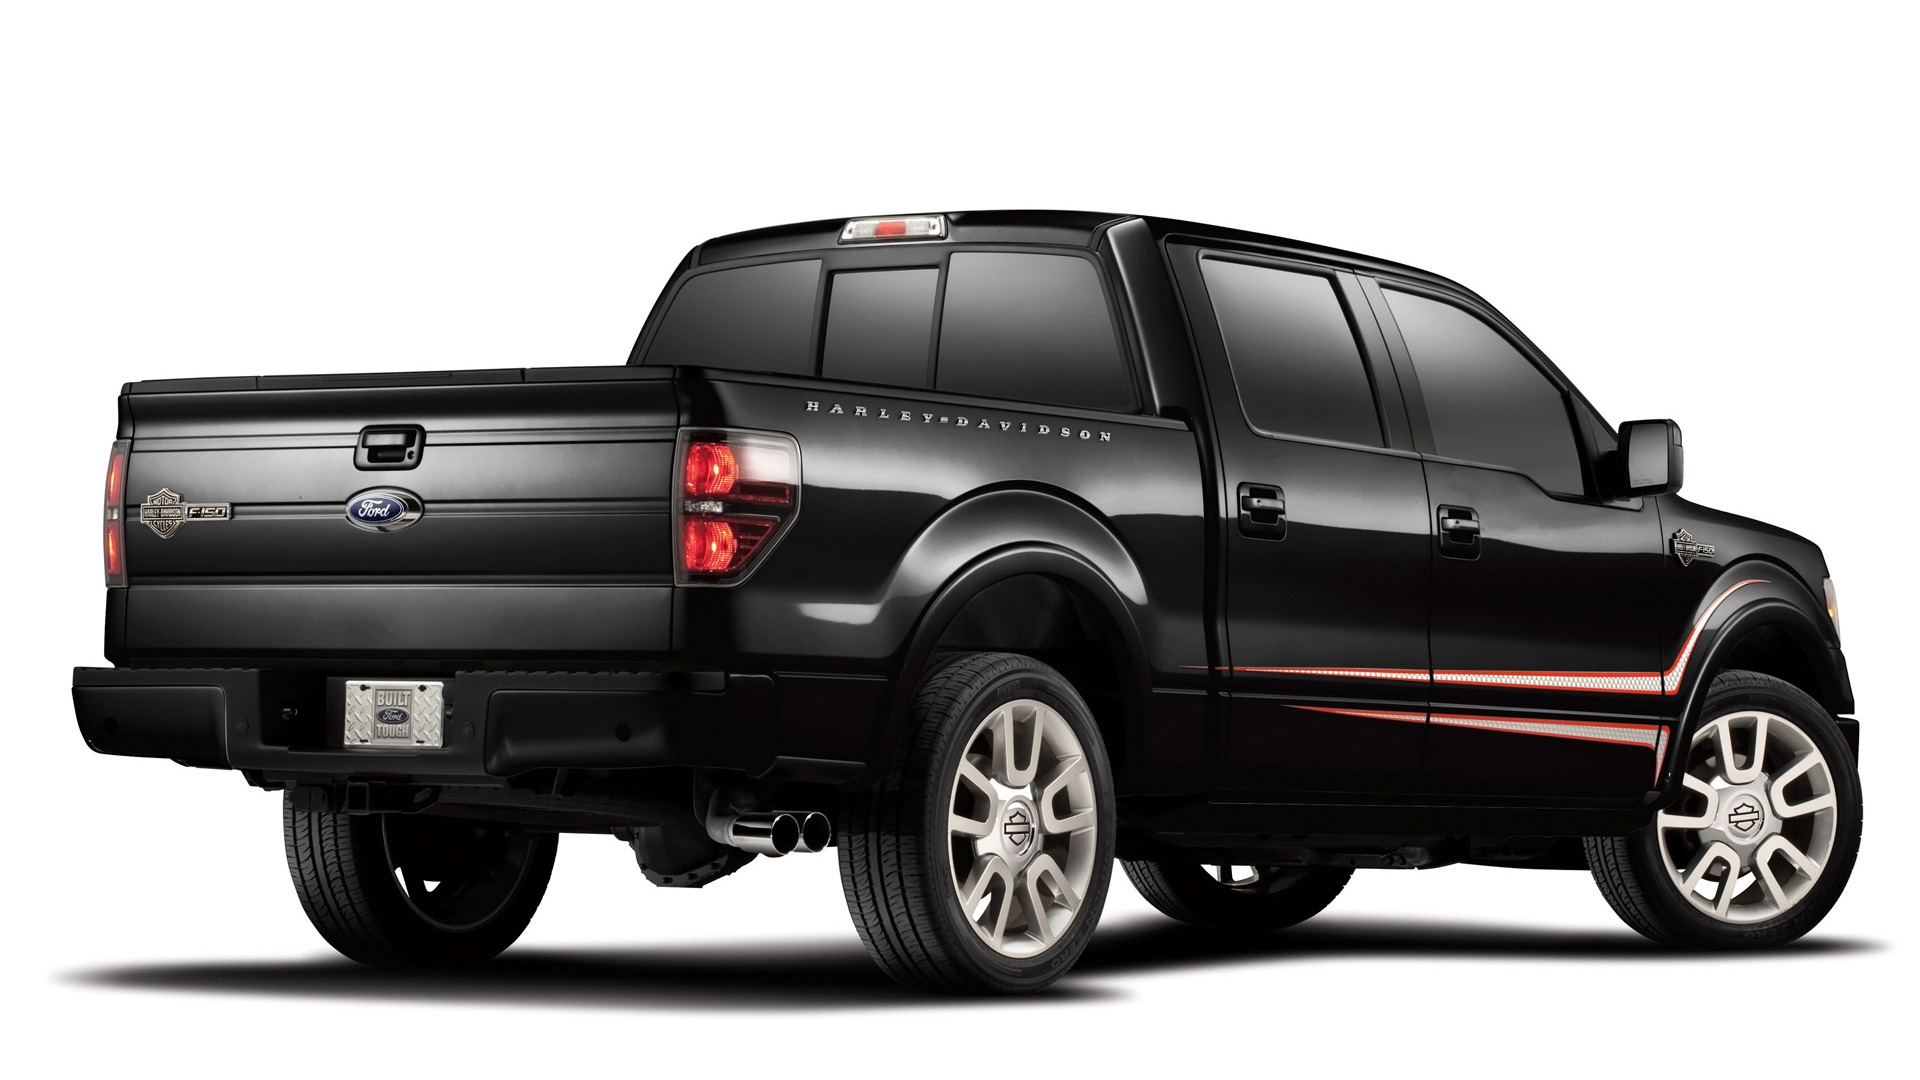 Ford Harley Davidson F 150 Rear Angle for 1920 x 1080 HDTV 1080p resolution